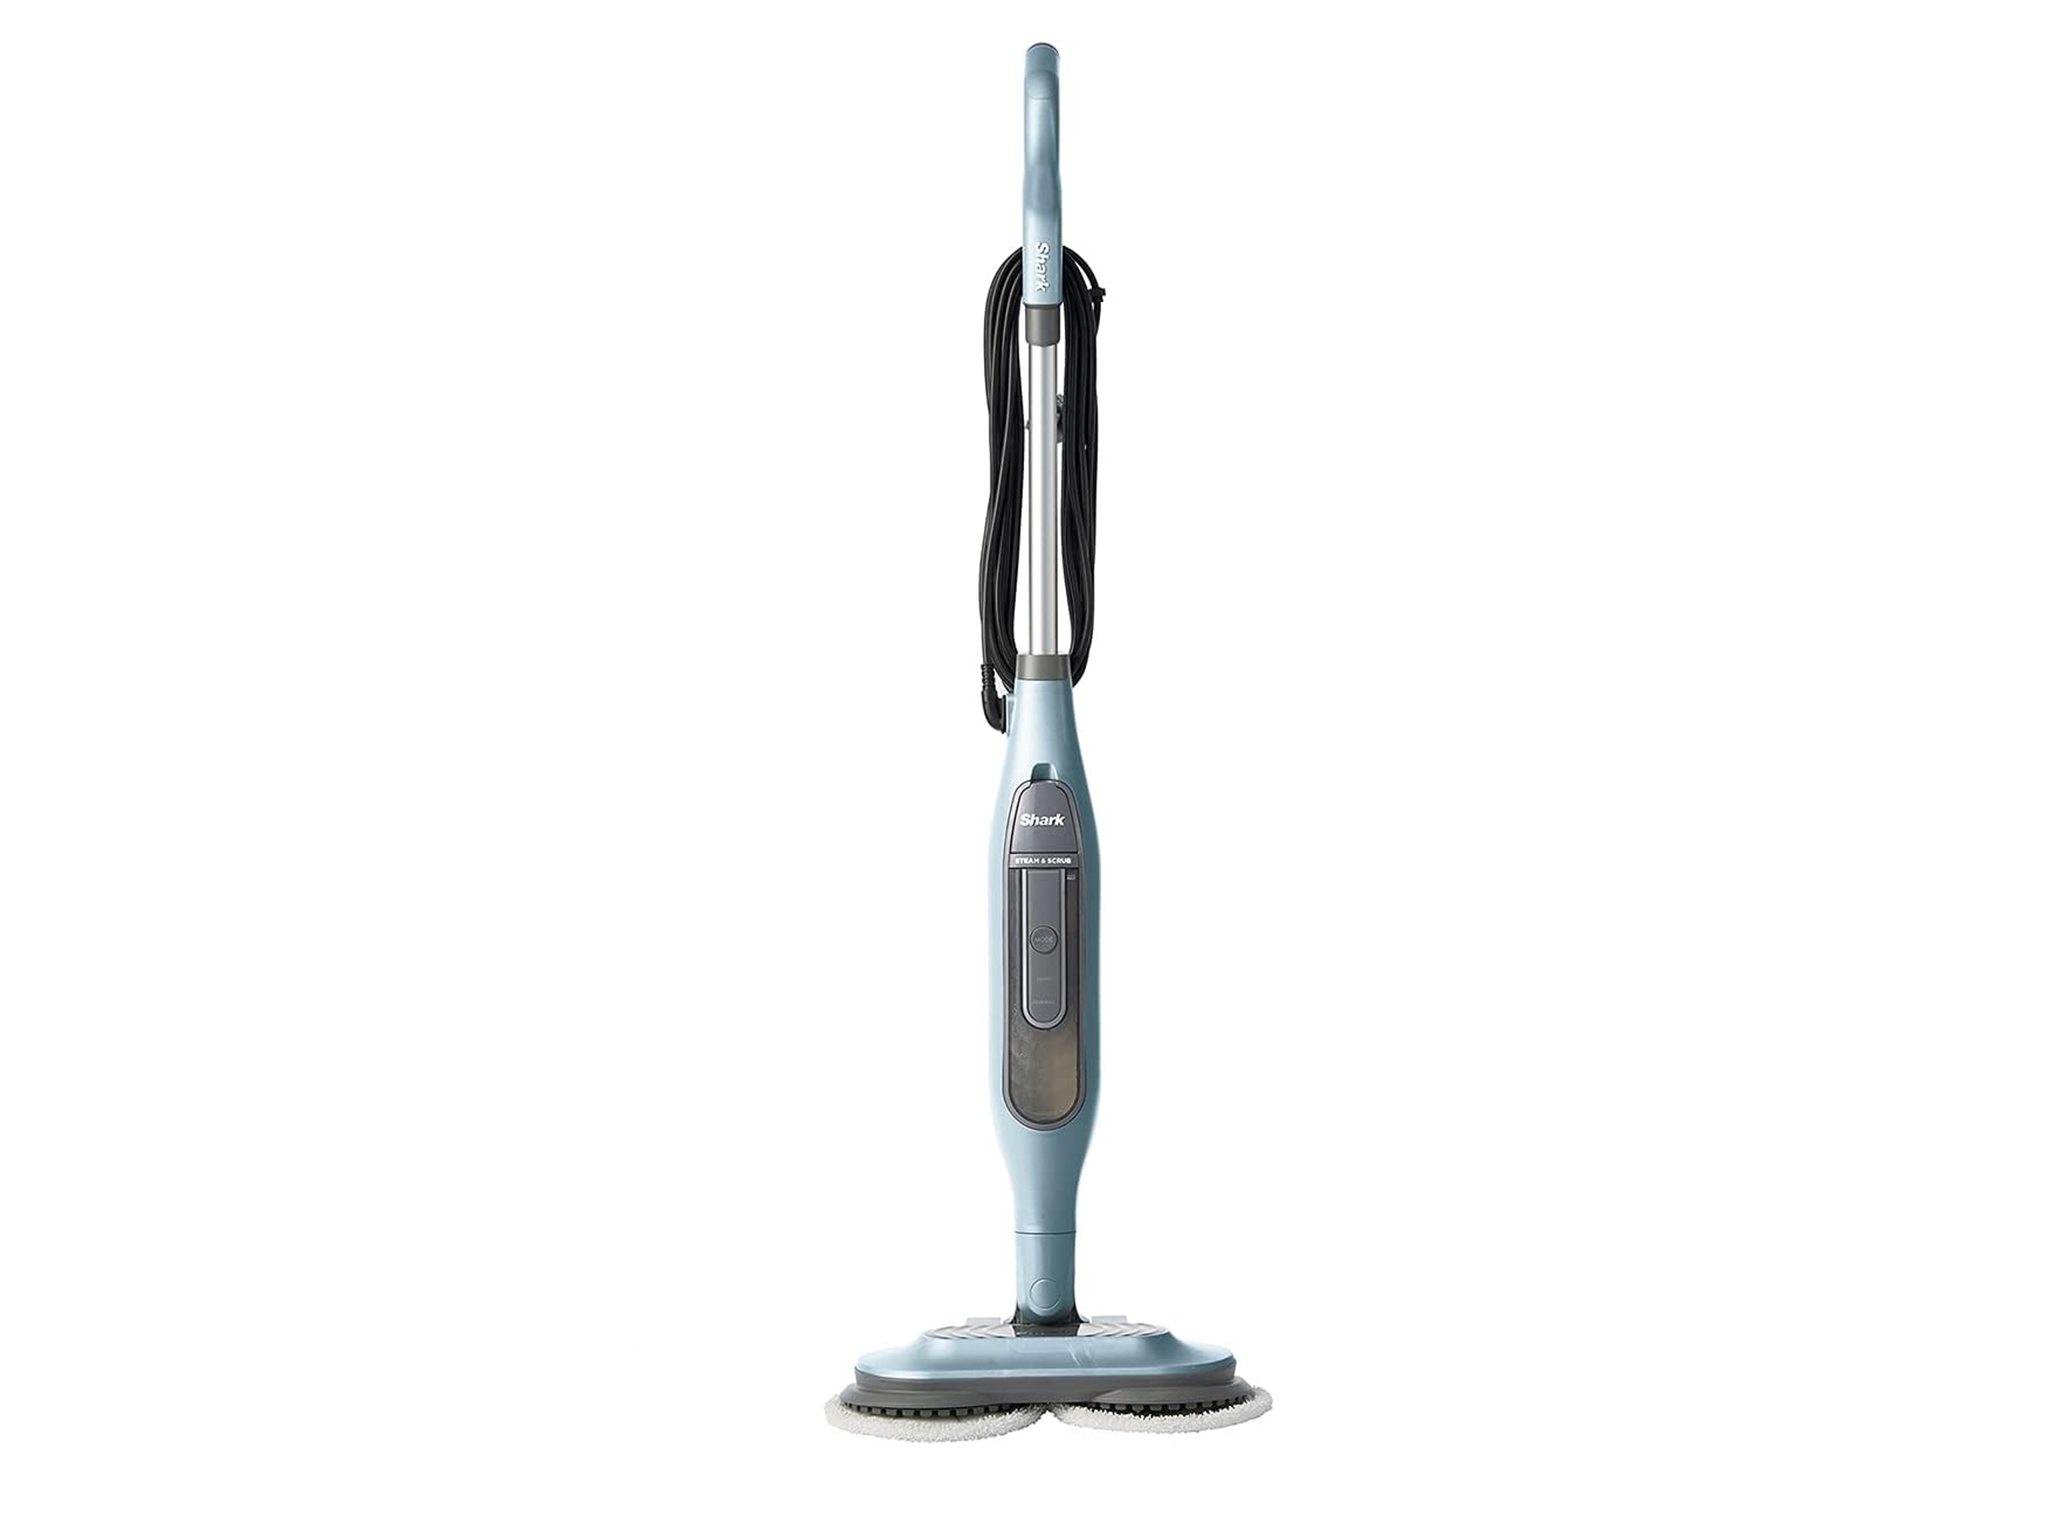 amazon, shark’s steam mop promises to make light work of dirty floors – and it’s 30% off